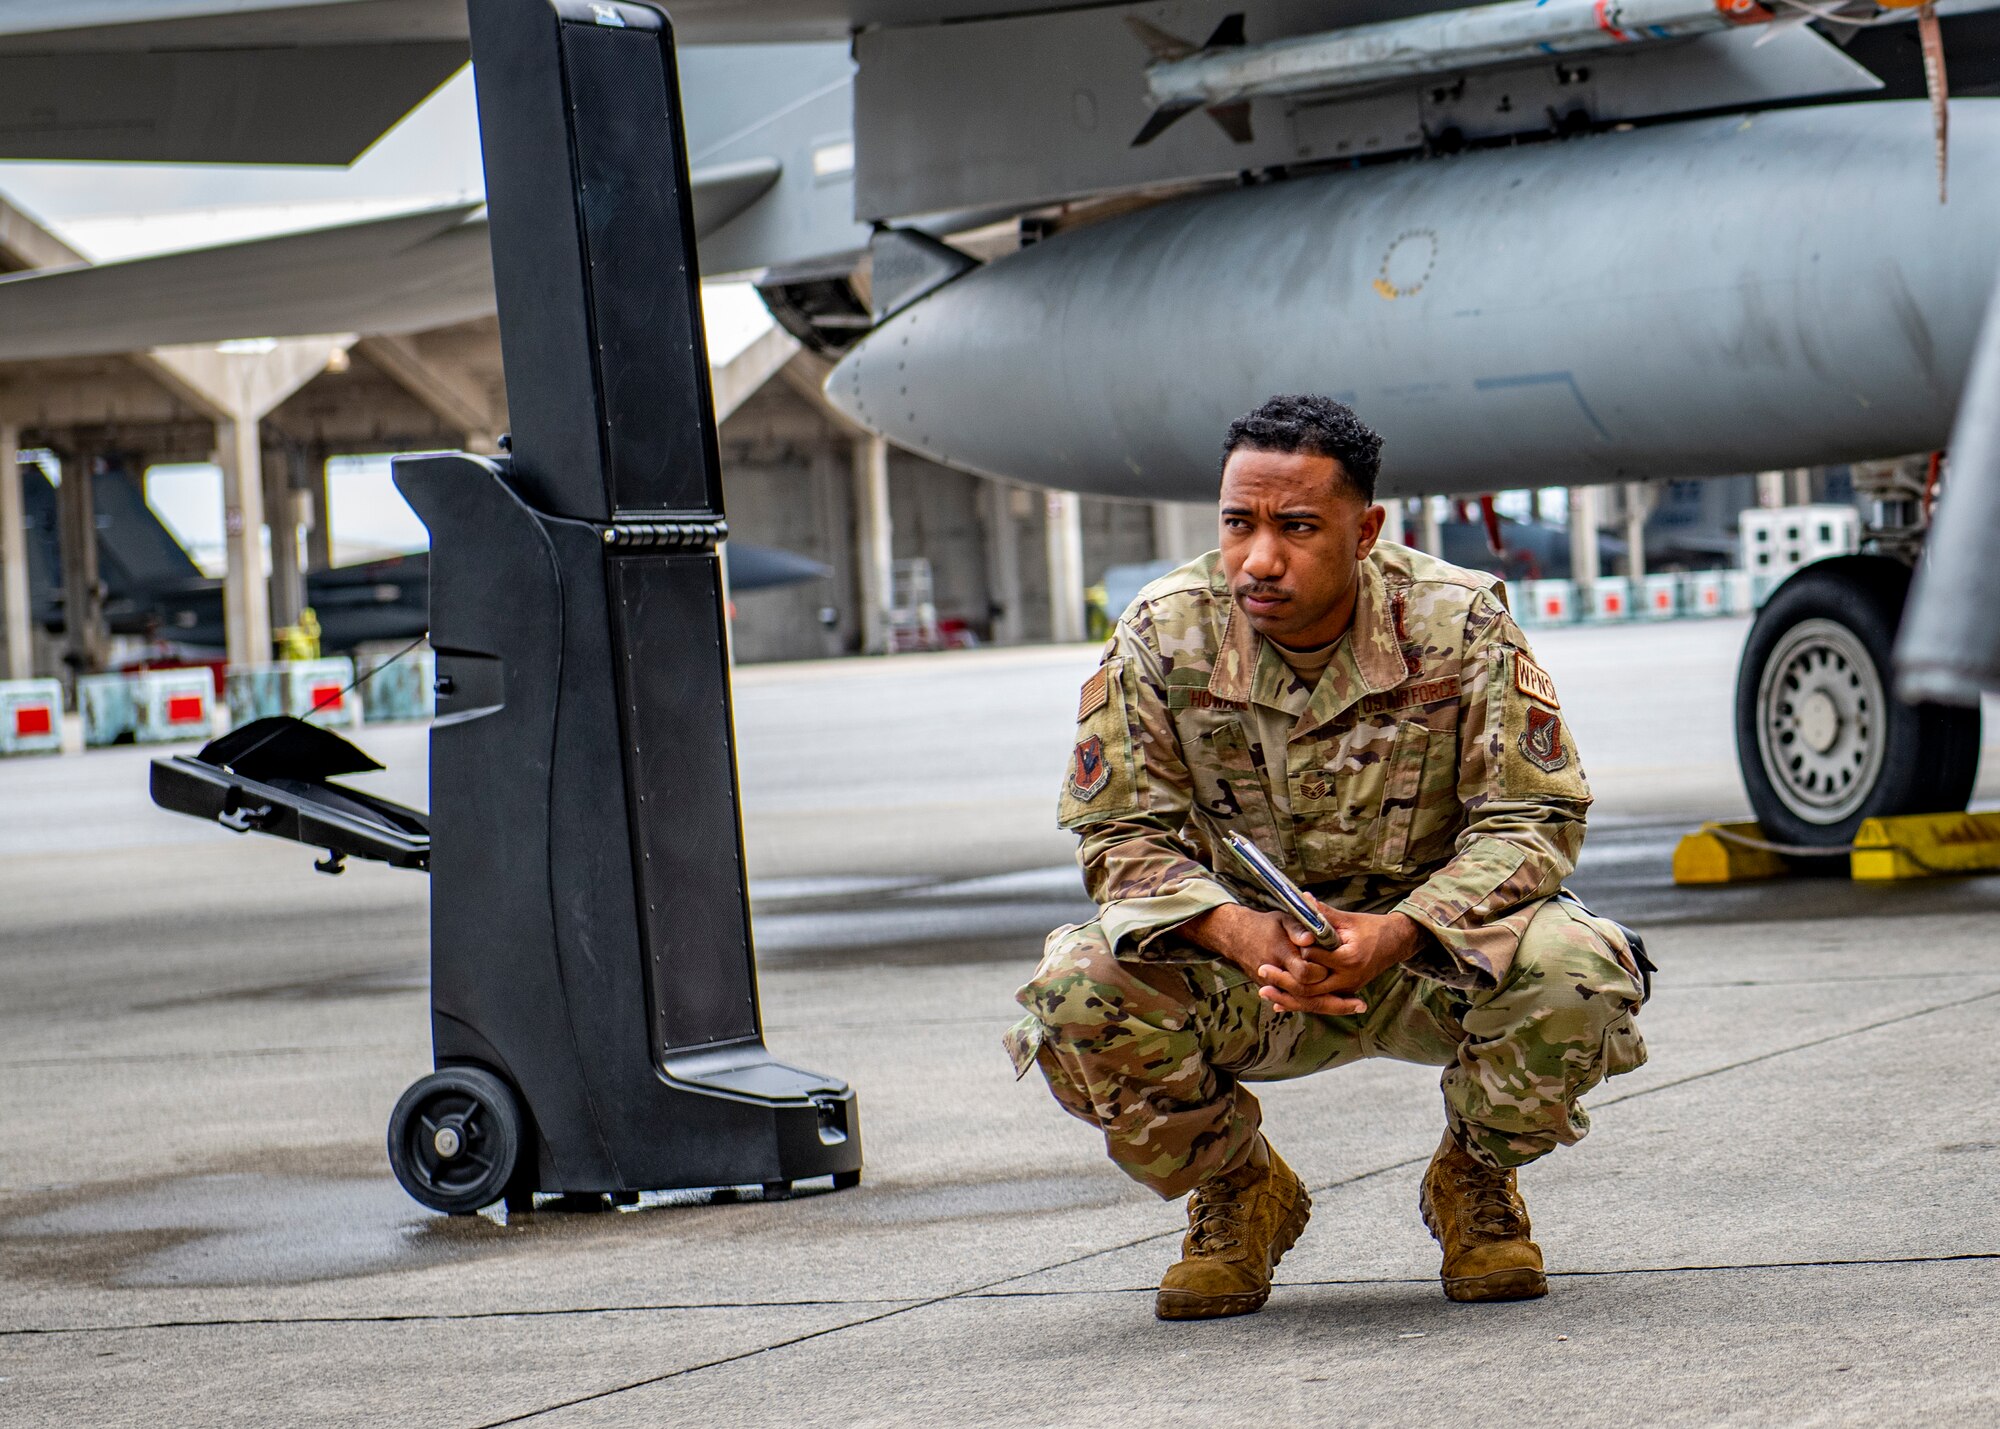 An Airman observes a competition